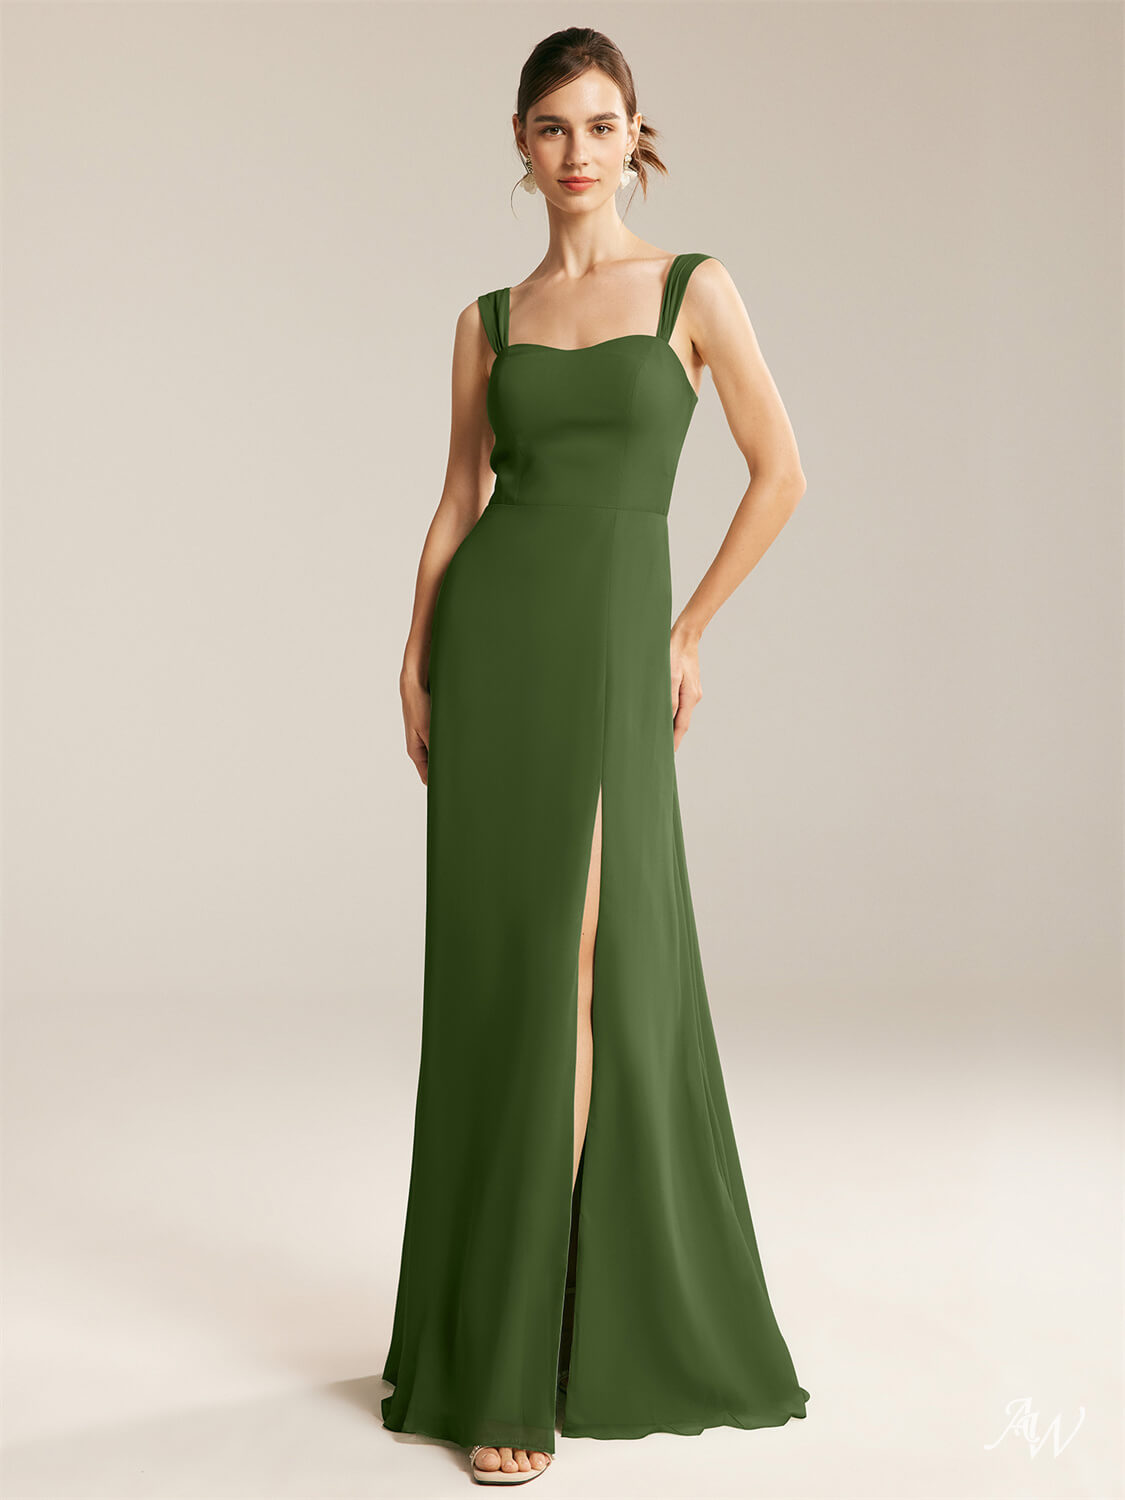 Affordable bridesmaid dresses from AW Bridal